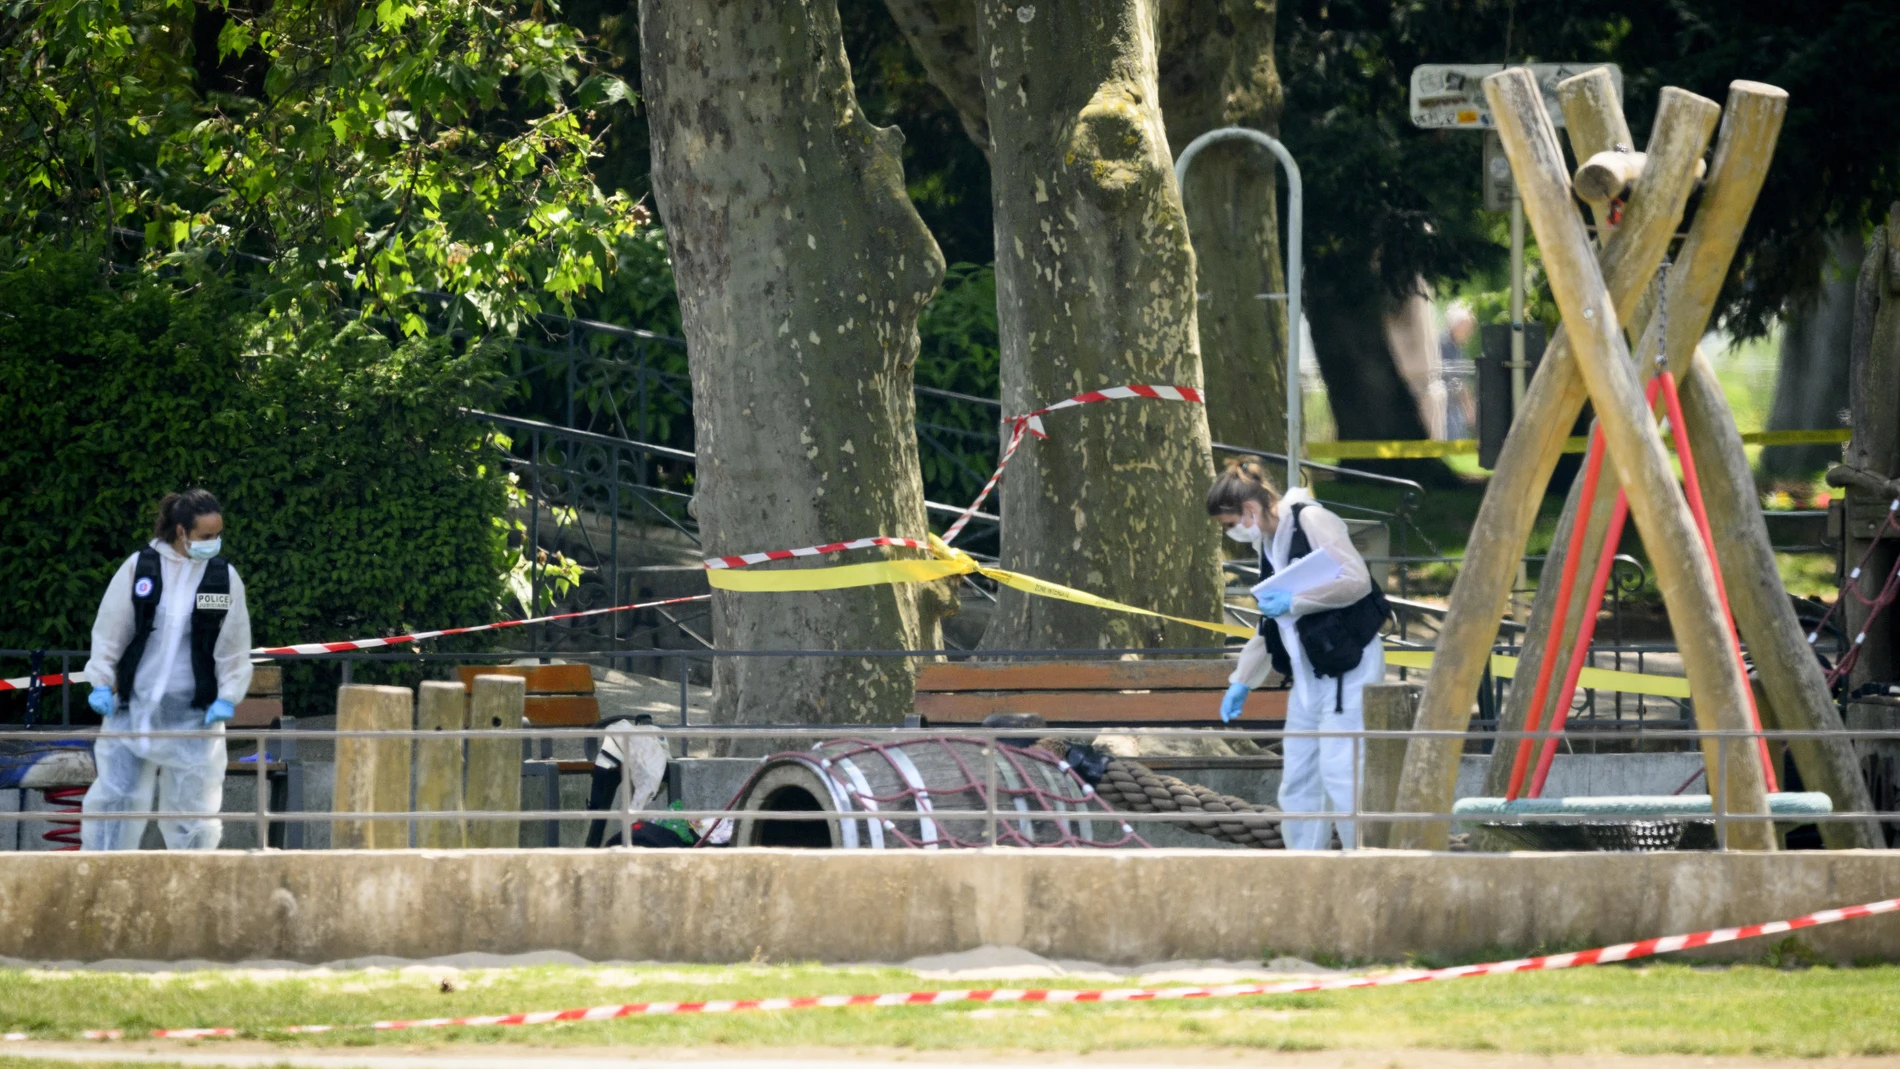 Annecy (France), 08/06/2023.- Police officers work inside a cordoned-off area following a knife attack in Annecy, France, 08 June 2023. The Prefecture of Haute-Savoie confirmed on 08 June that a man had carried out an attack in the Paquier d'Annecy park area, injuring at least six people who were taken to hospital, including four children. (Atentado, Francia) EFE/EPA/JEAN-CHRISTOPHE BOTT 